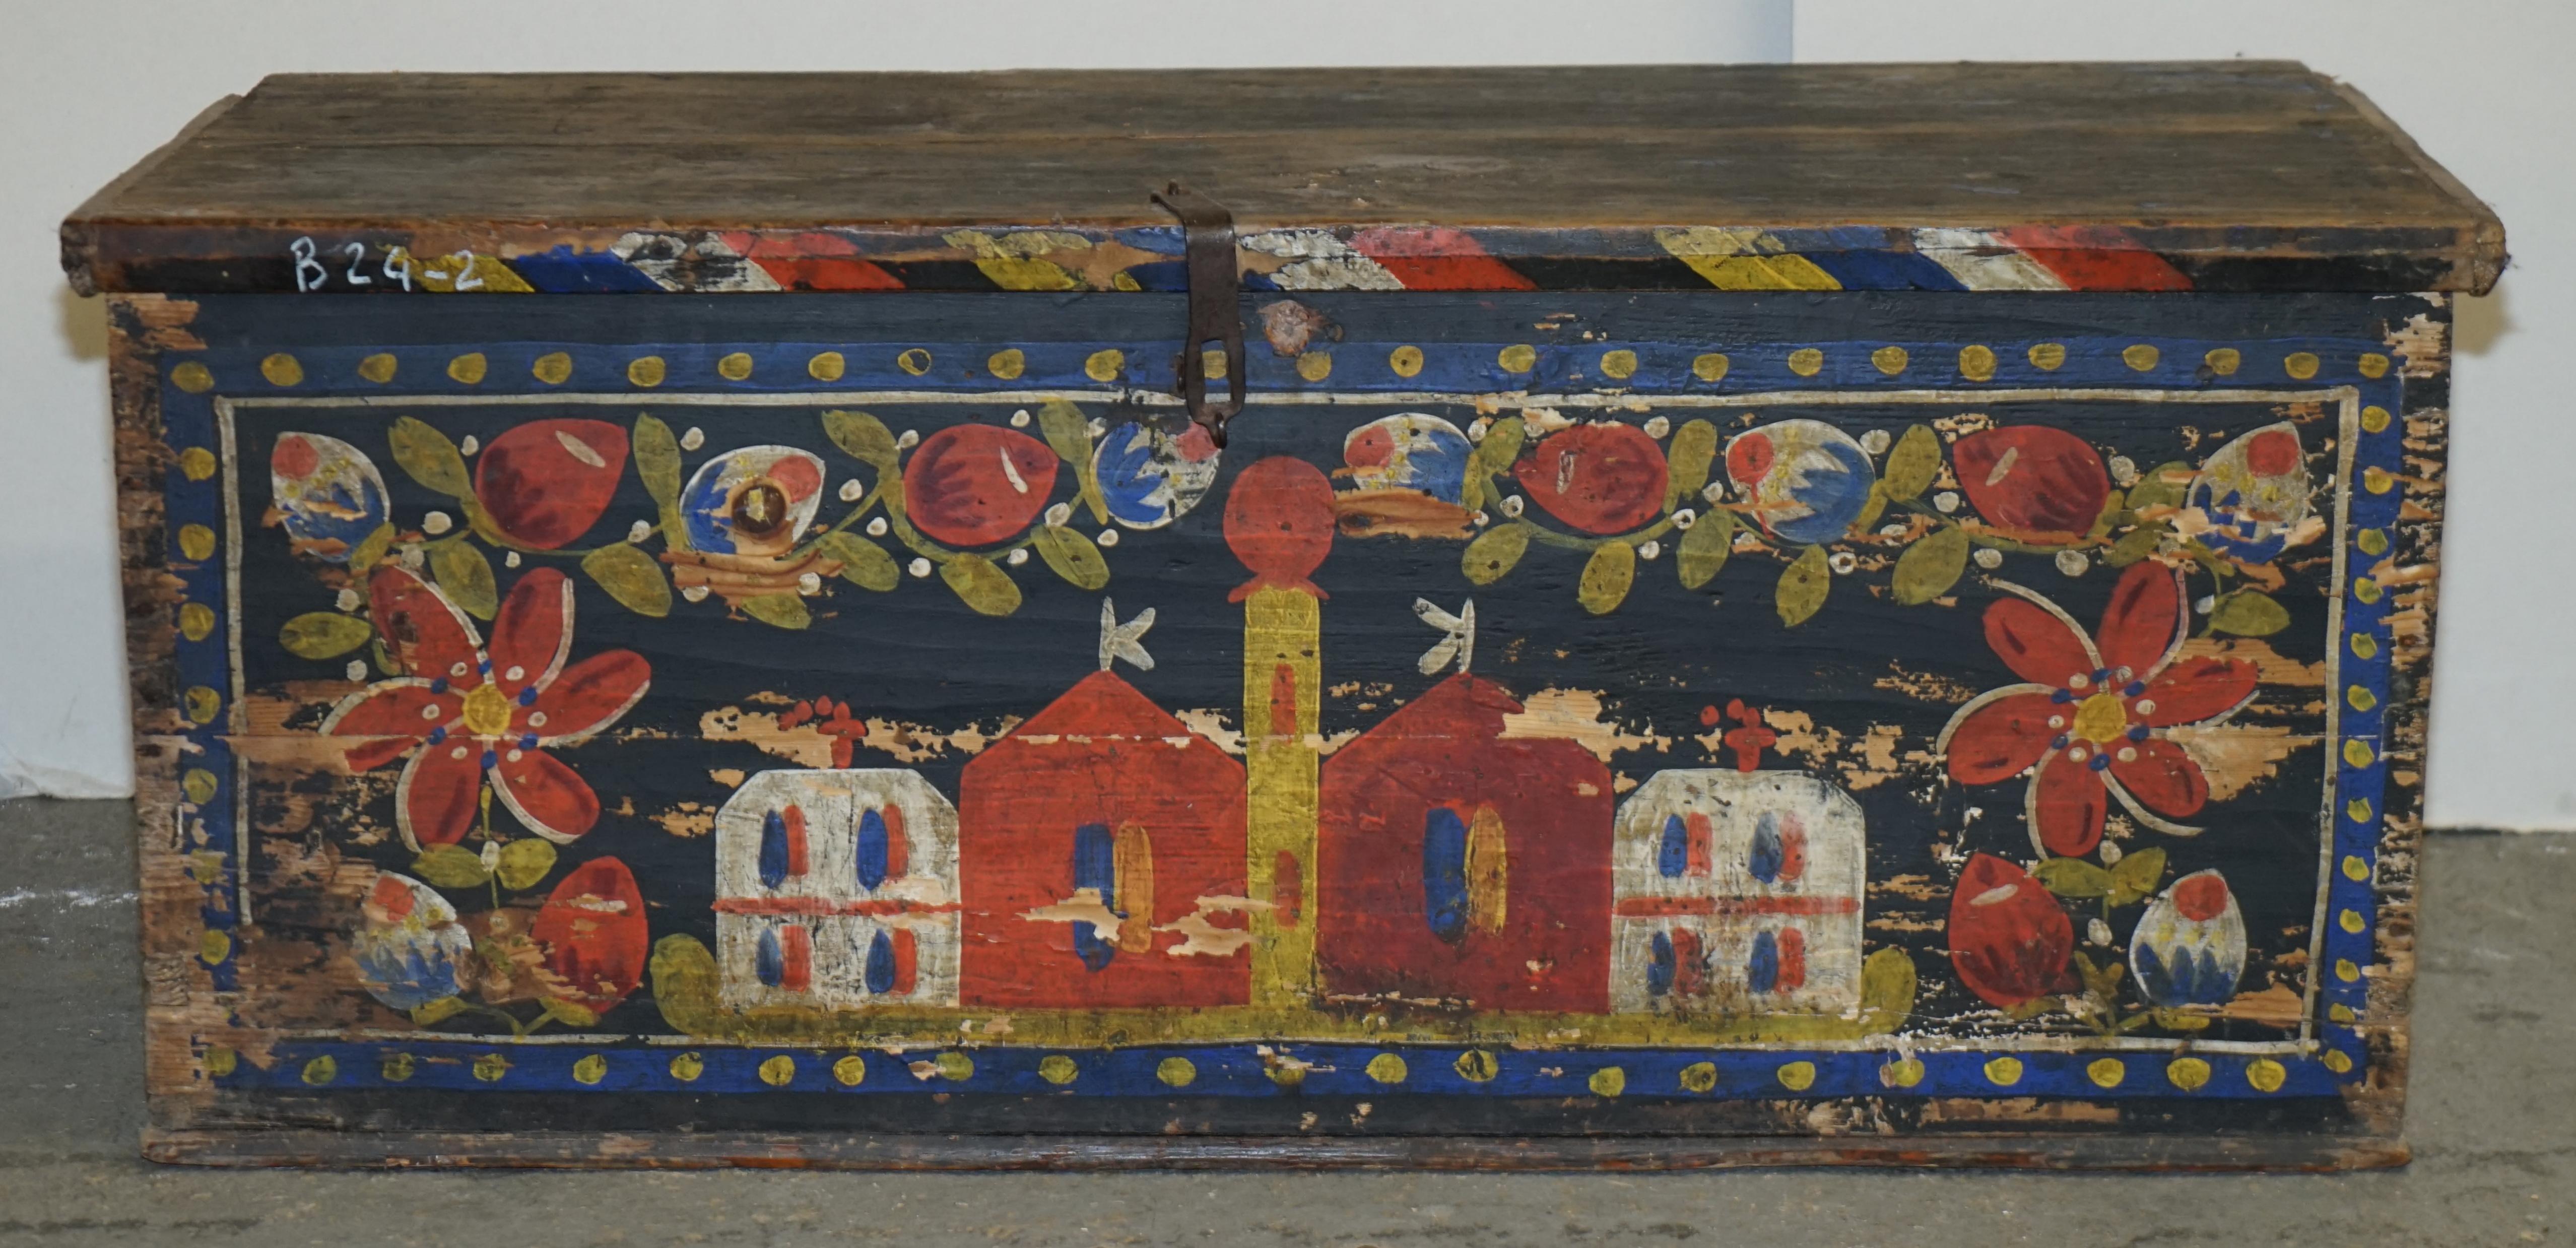 We are delighted to offer for sale this stunning, circa 1900 hand painted Romanian clothes trunk or marriage coffer chest depicting a large Church to the front

I have recently purchased a very large collection of these original, antique painted